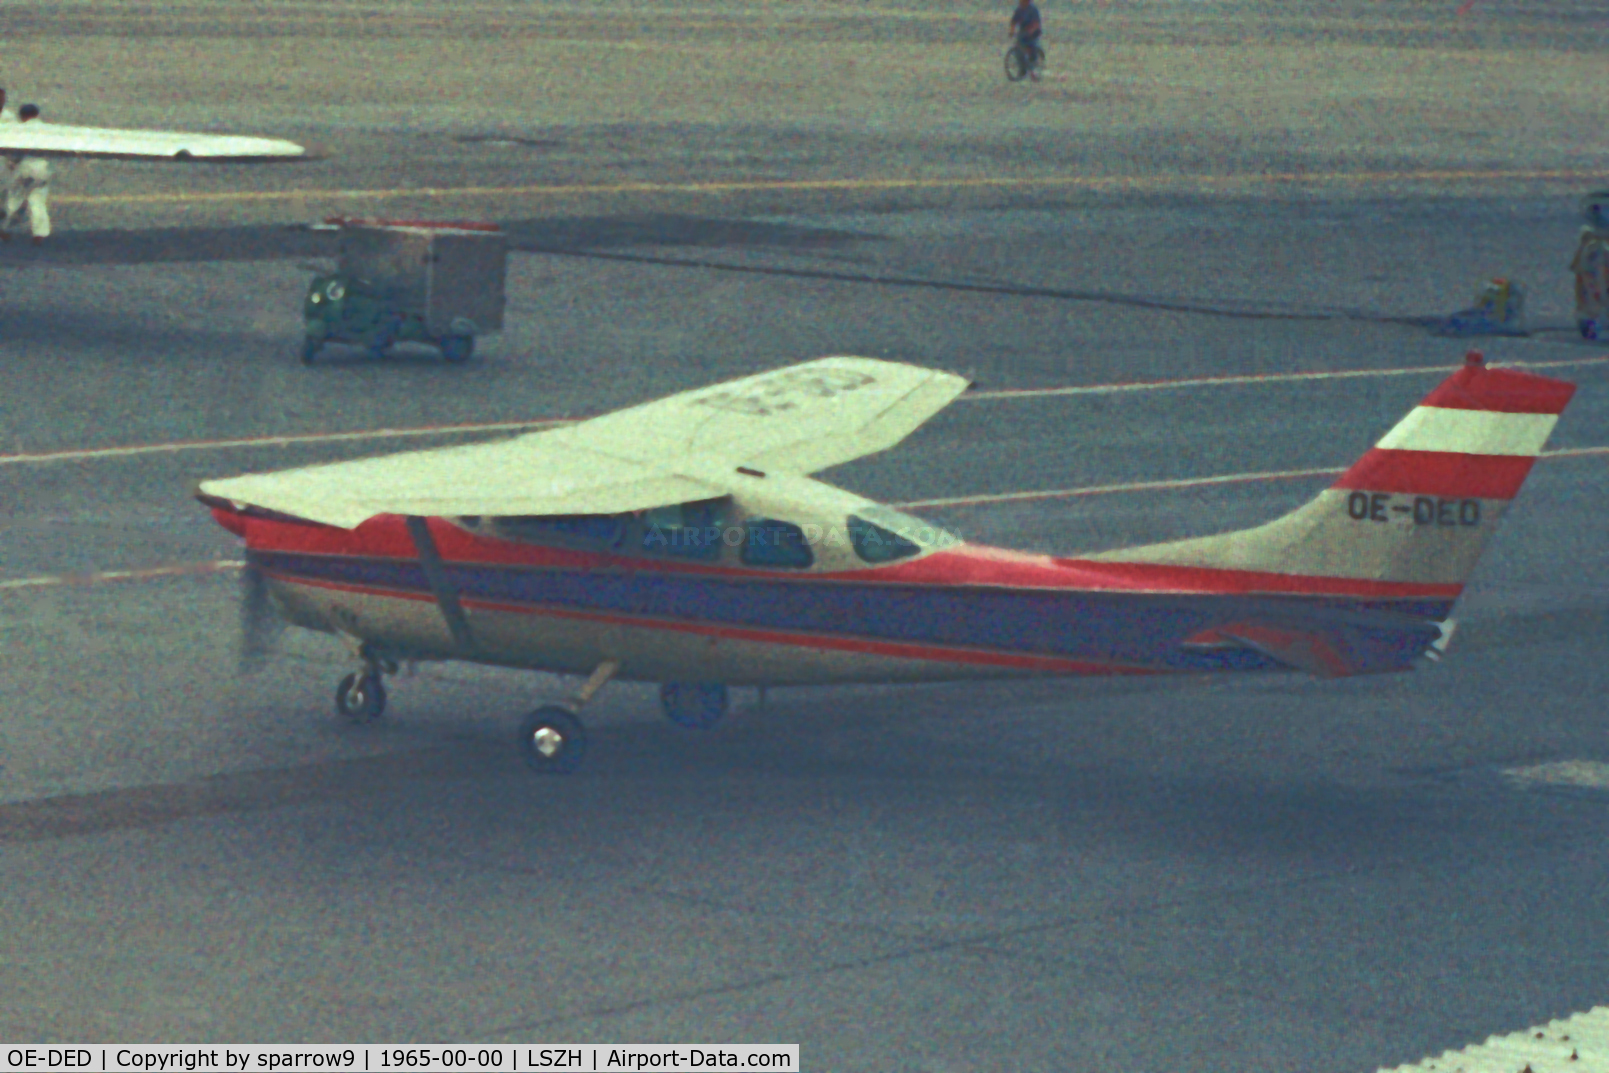 OE-DED, 1962 Cessna 210B C/N 21057970, Parked at Zurich-Kloten Airport 1965.Scanned from a negative.